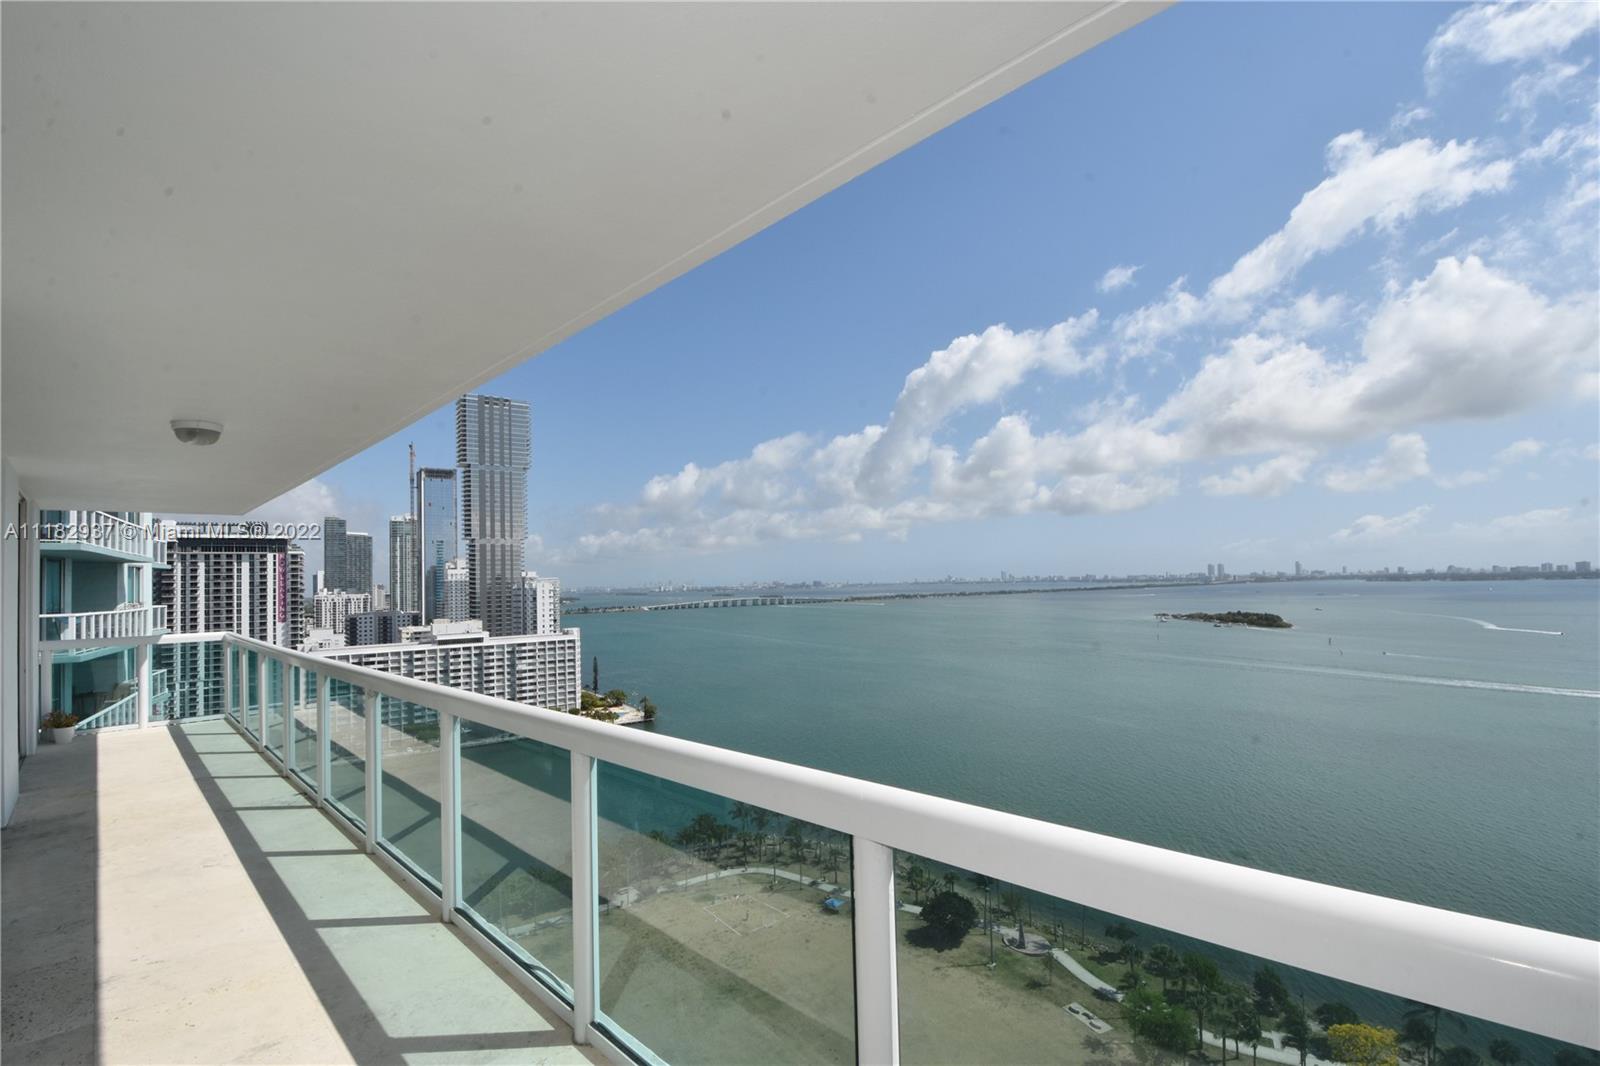 NEW PRICE.$799K INVESTORS DREAM. LOCATION!!!LOCATION!!!LOCATION!! RARE 09 line on the market of the amazing 1800 Club Condo building in sought after Edgewater. 2 bedroom 2 bath . Breathtaking bay views directly across Biscayne Bay & Margaret Pace Park within walking distance from the Performance Arts Center, and minutes from the best areas in Miami: Downtown, Wynwood, Brickell, Midtown, Design District ,Miami Beach, Port of Miami and the Miami Intl airport. Walk to cafes, restaurants, night life and so much more. Fitness center , spa, 3 pools, sky lobby and party room.